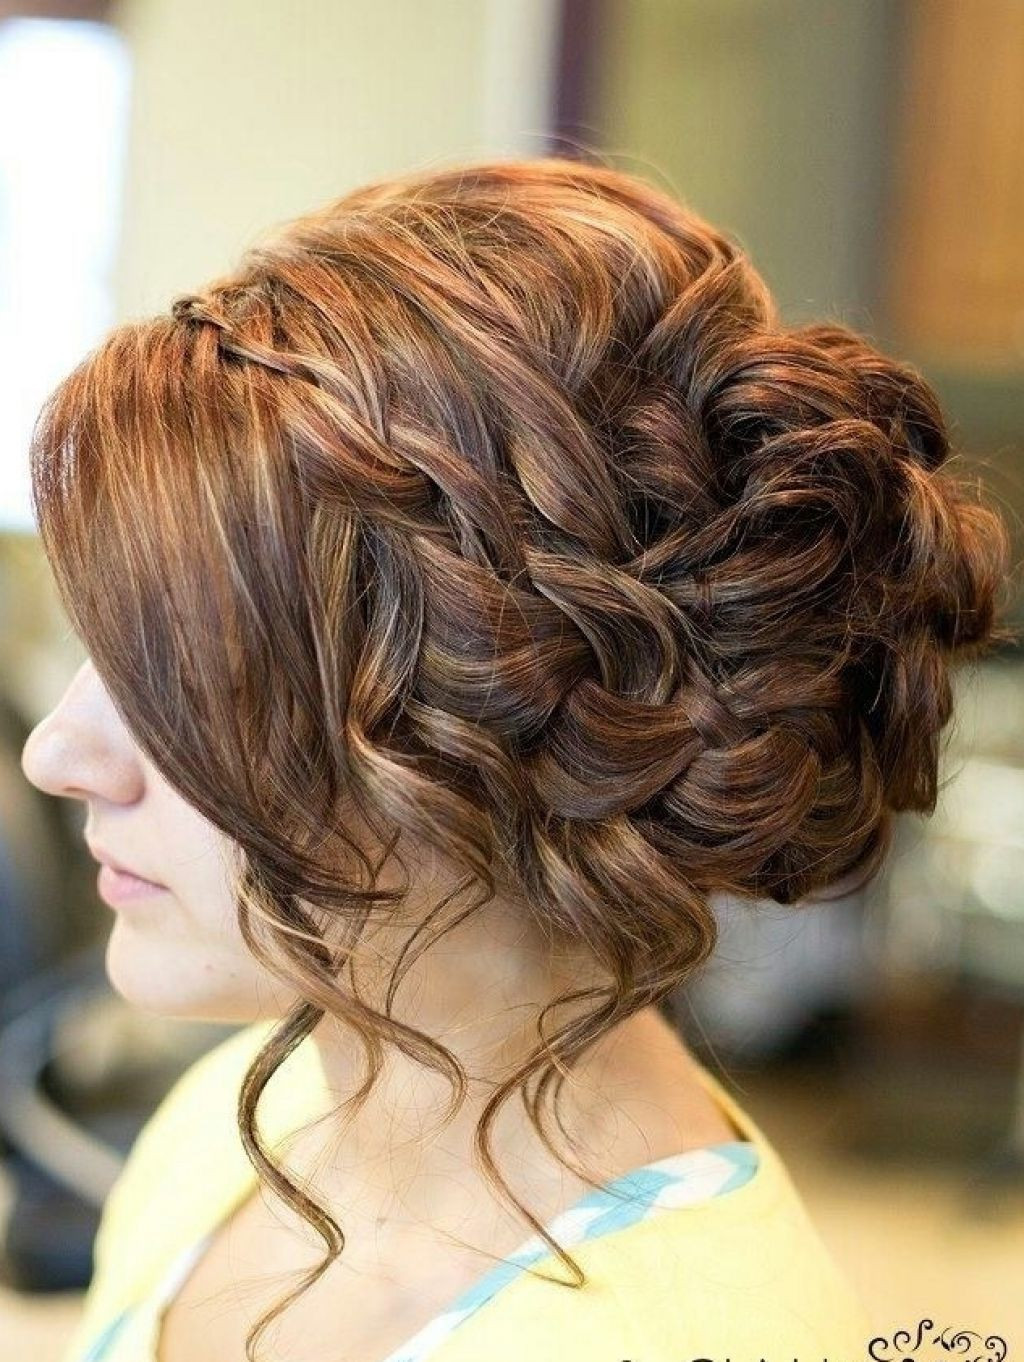 Prom Hairstyle Braid
 14 Prom Hairstyles For Long Hair That Are Simply Adorable